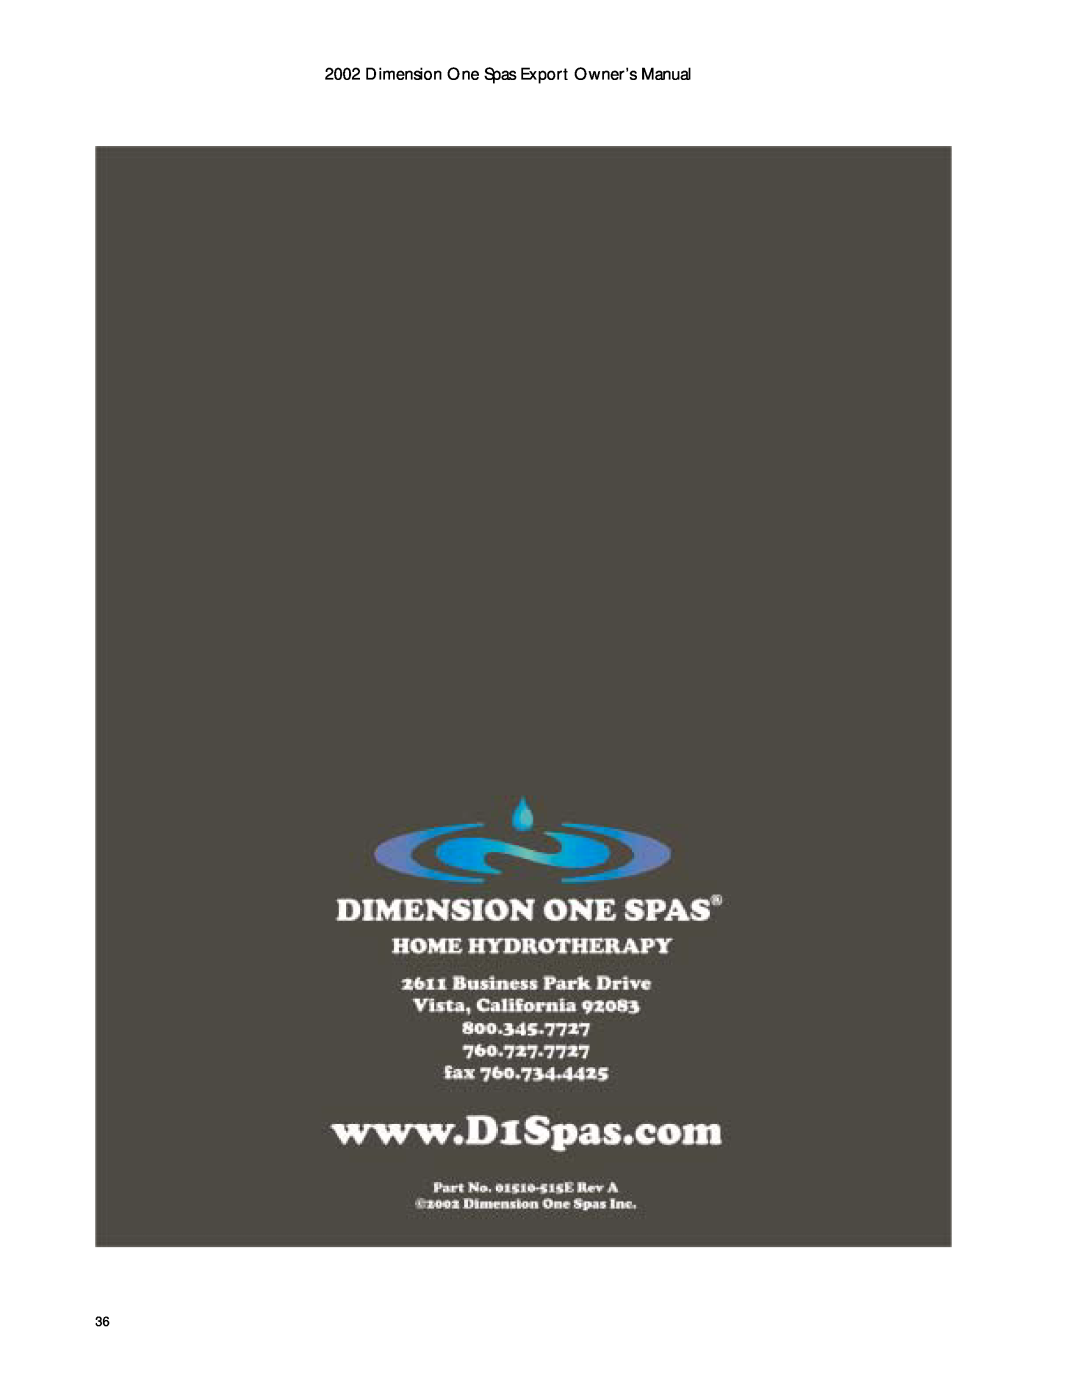 Dimension One Spas Dynamic Massage Sequencer manual 